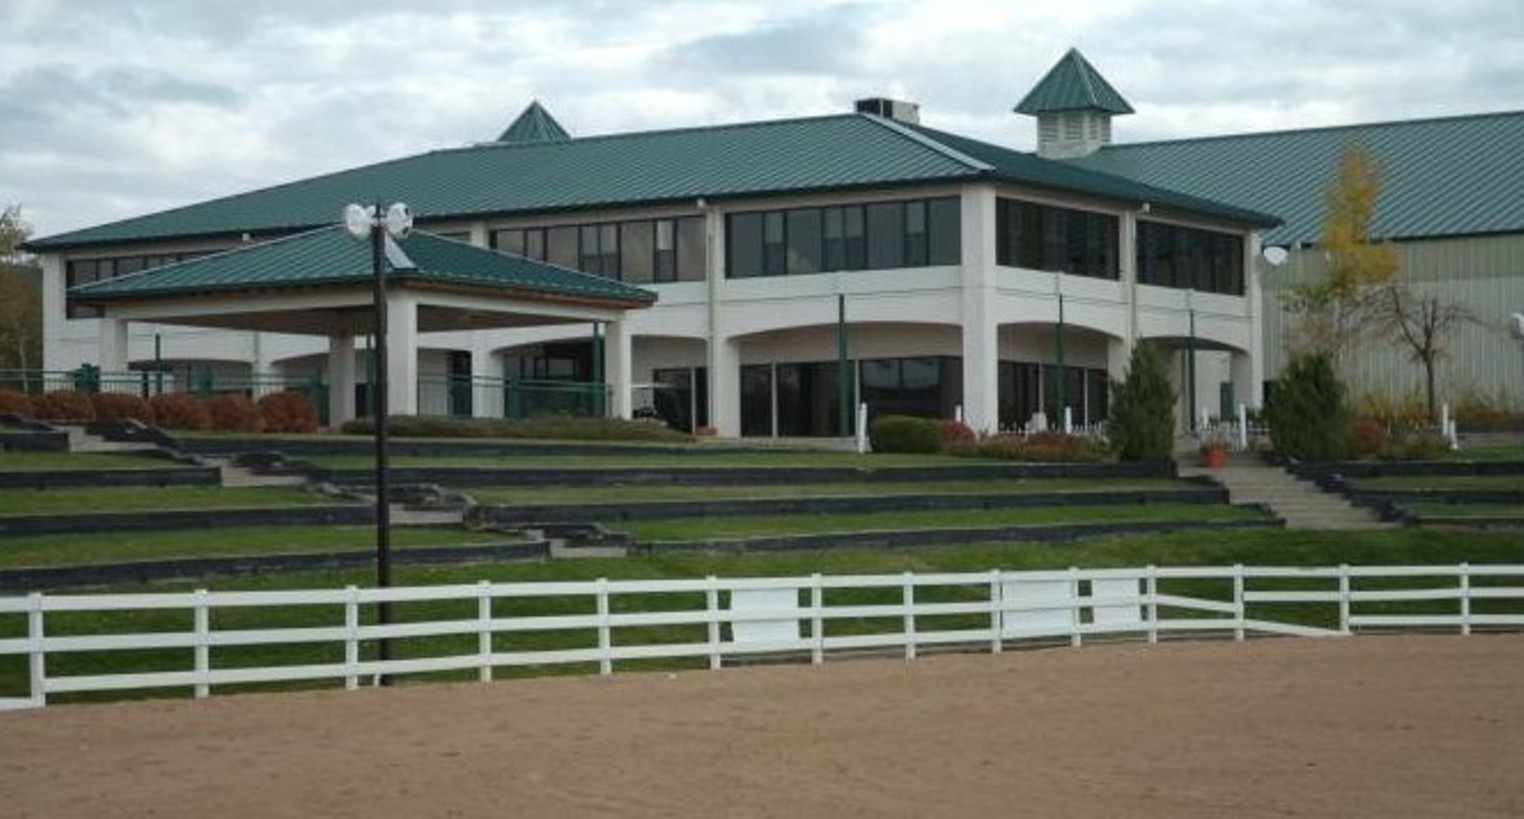 Best Spa for Horses 2005 The Colorado Horse Park Best of Denver® Best Restaurants, Bars, Clubs, Music and Stores in Denver Westword photo